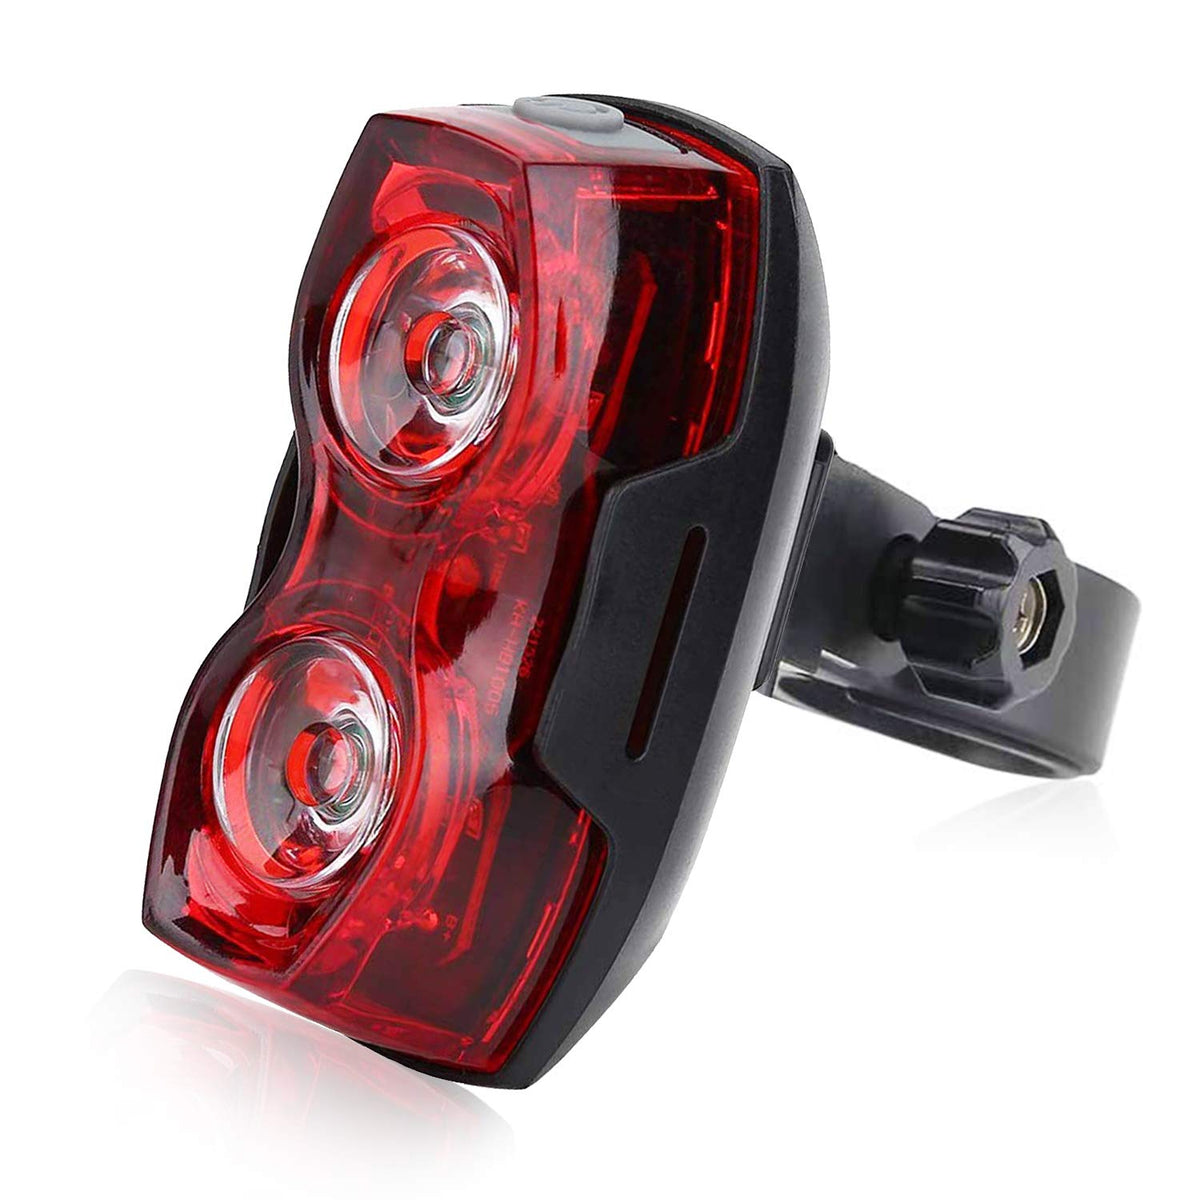 Strauss Dual LED Bicycle Rear Tail Light